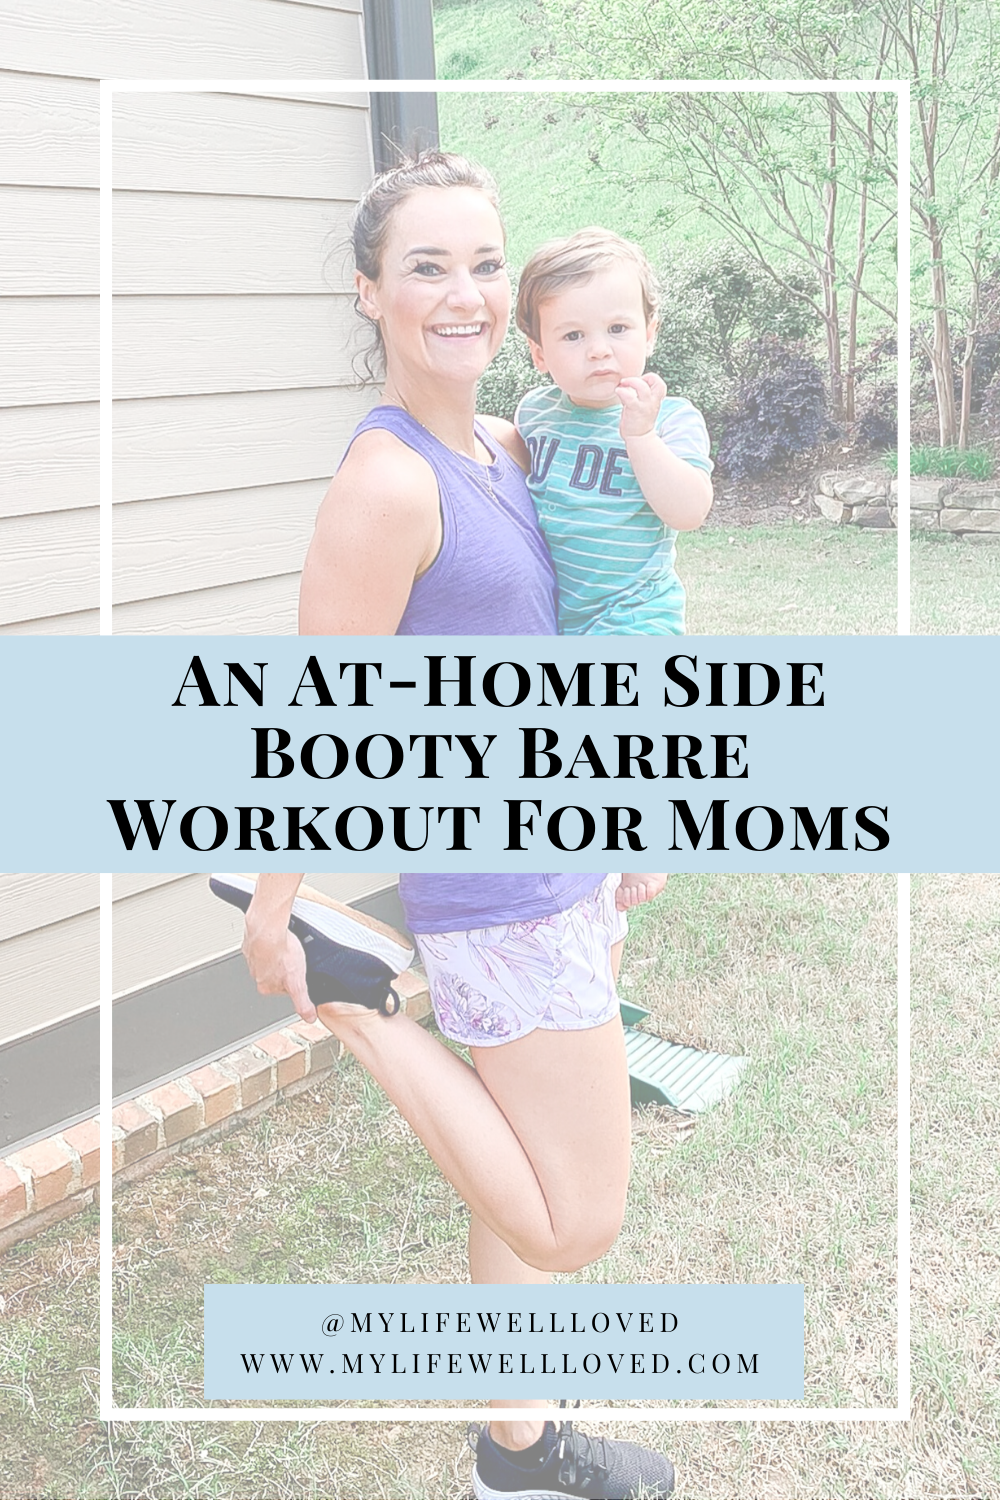 Best Online Barre Workout by Alabama Health + Fitness blogger, Heather Brown // My Life Well Loved